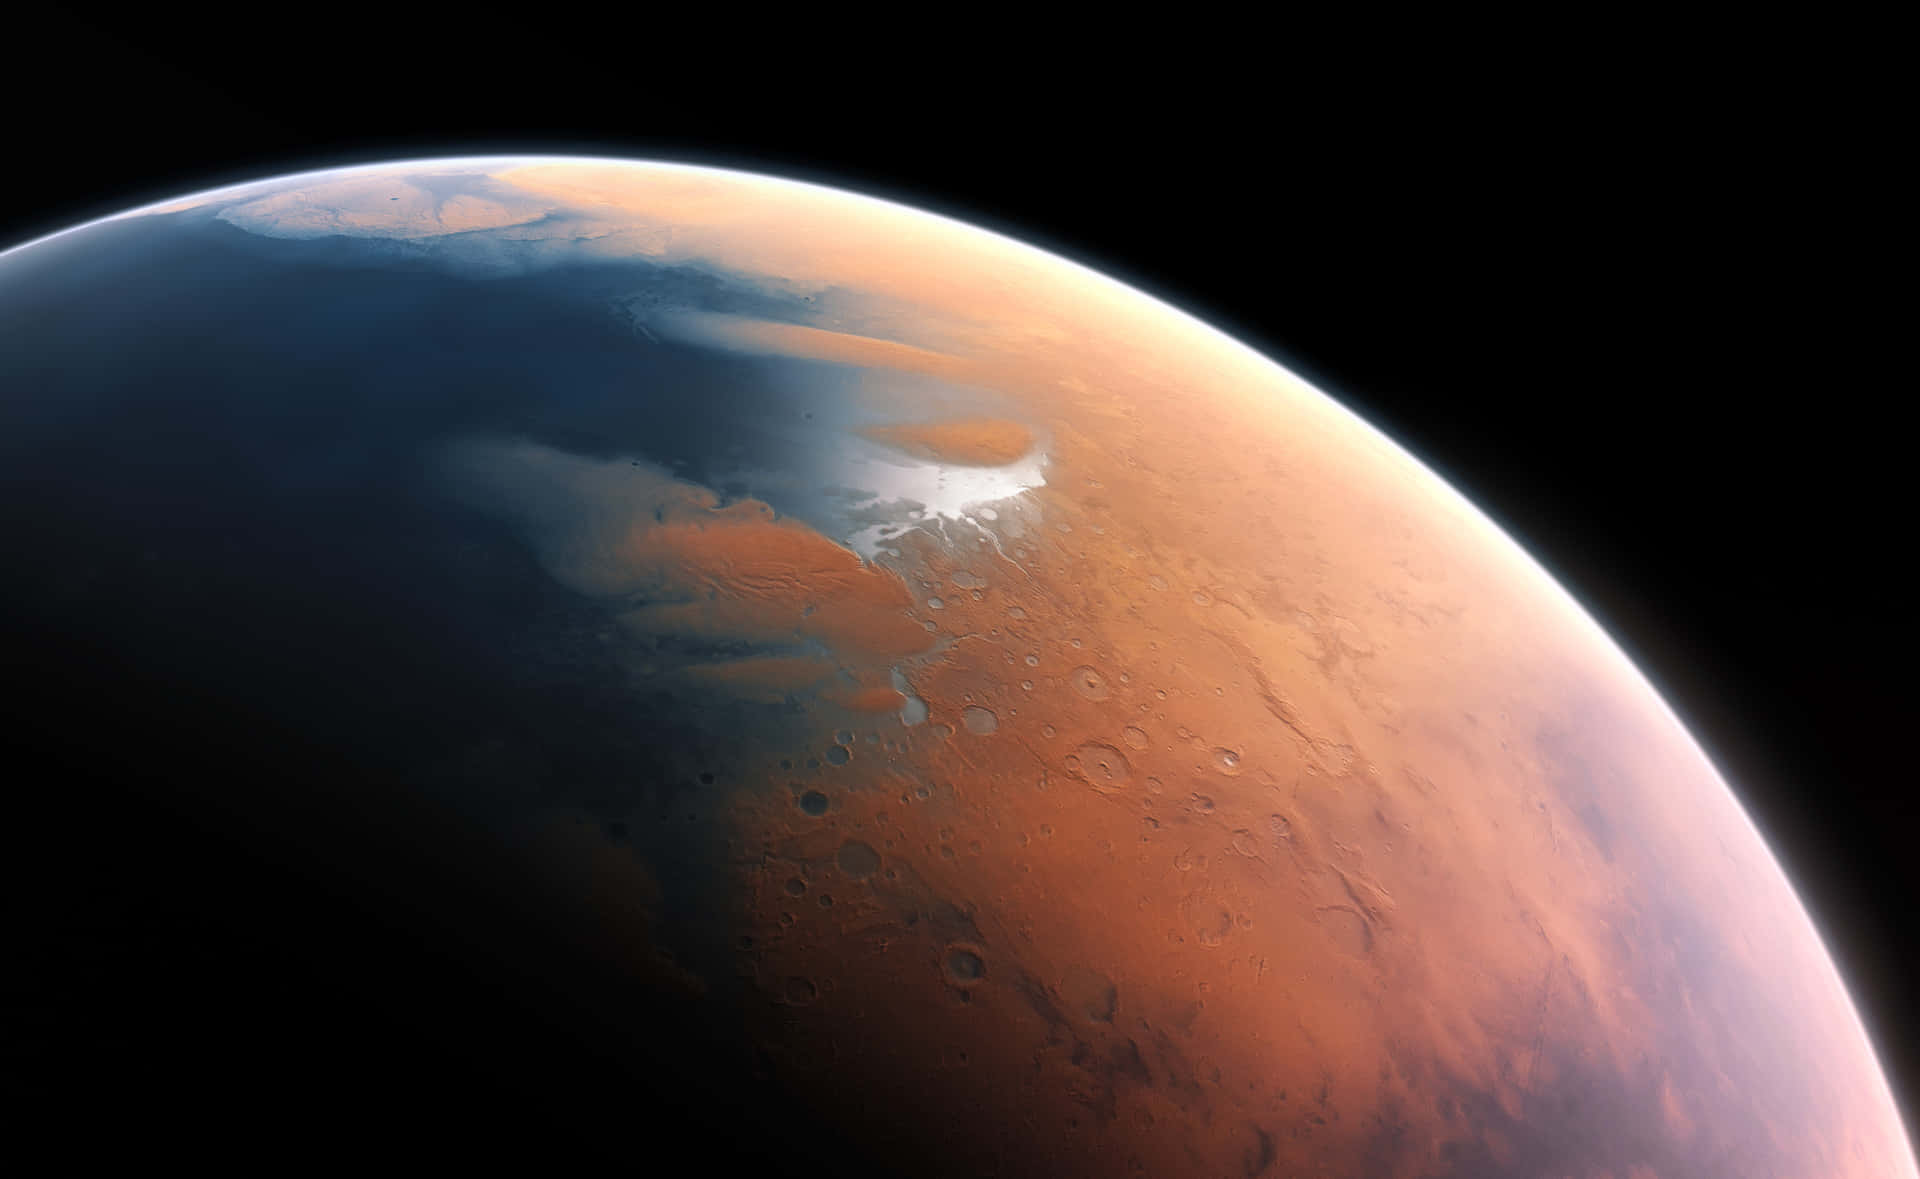 A Look into the Red Planet - Mars